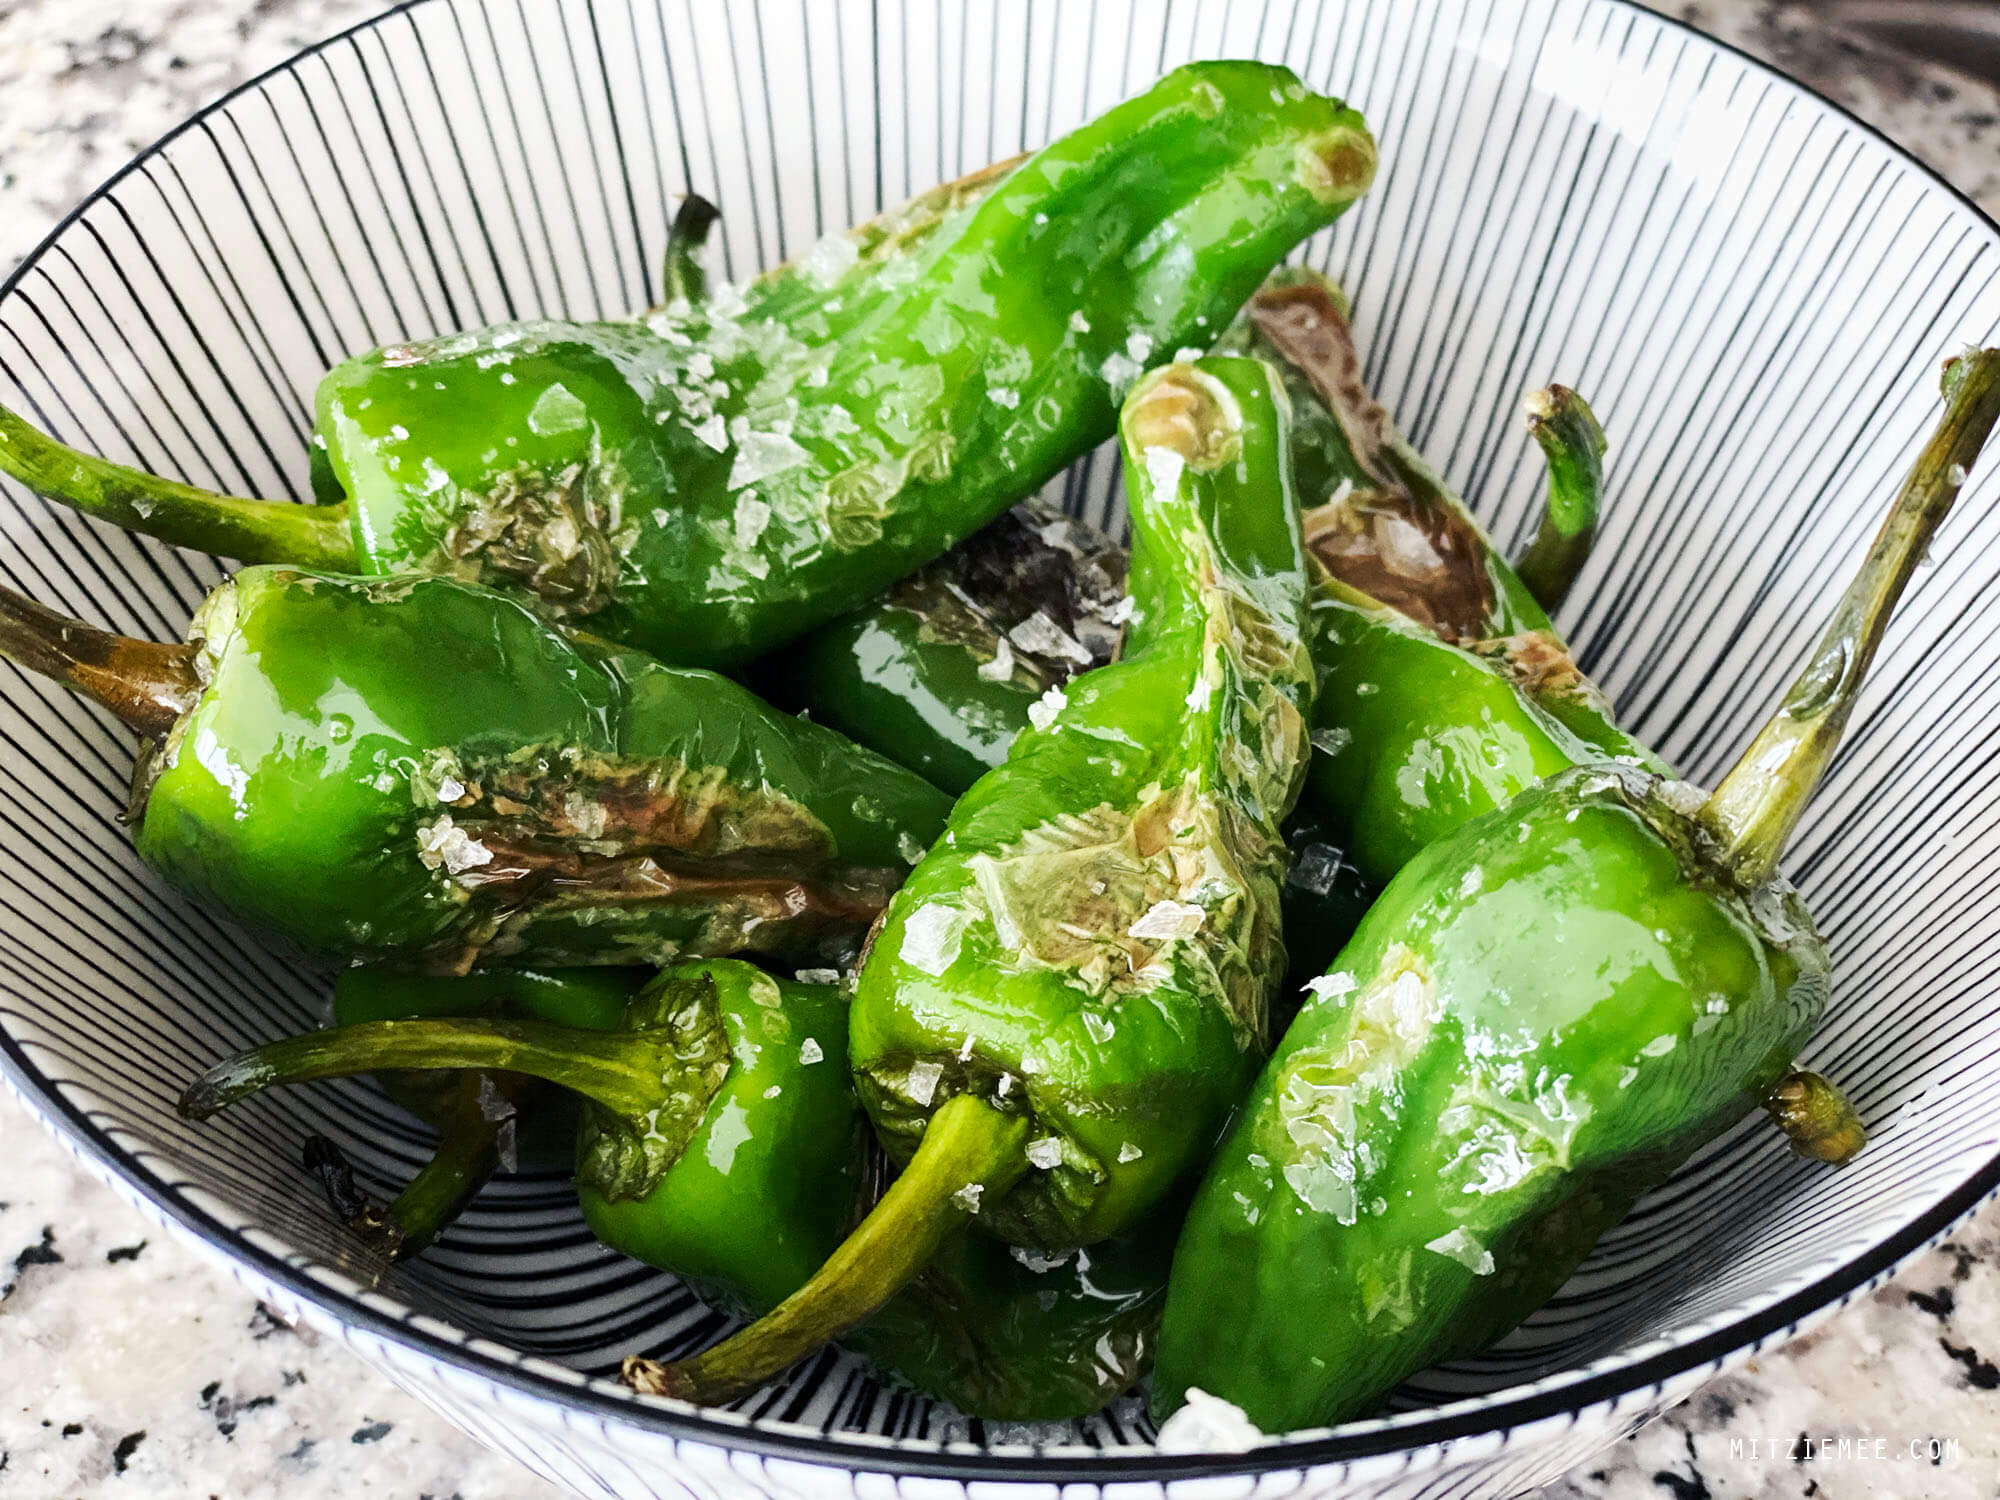 Pimientos de Padrón, blistered green peppers